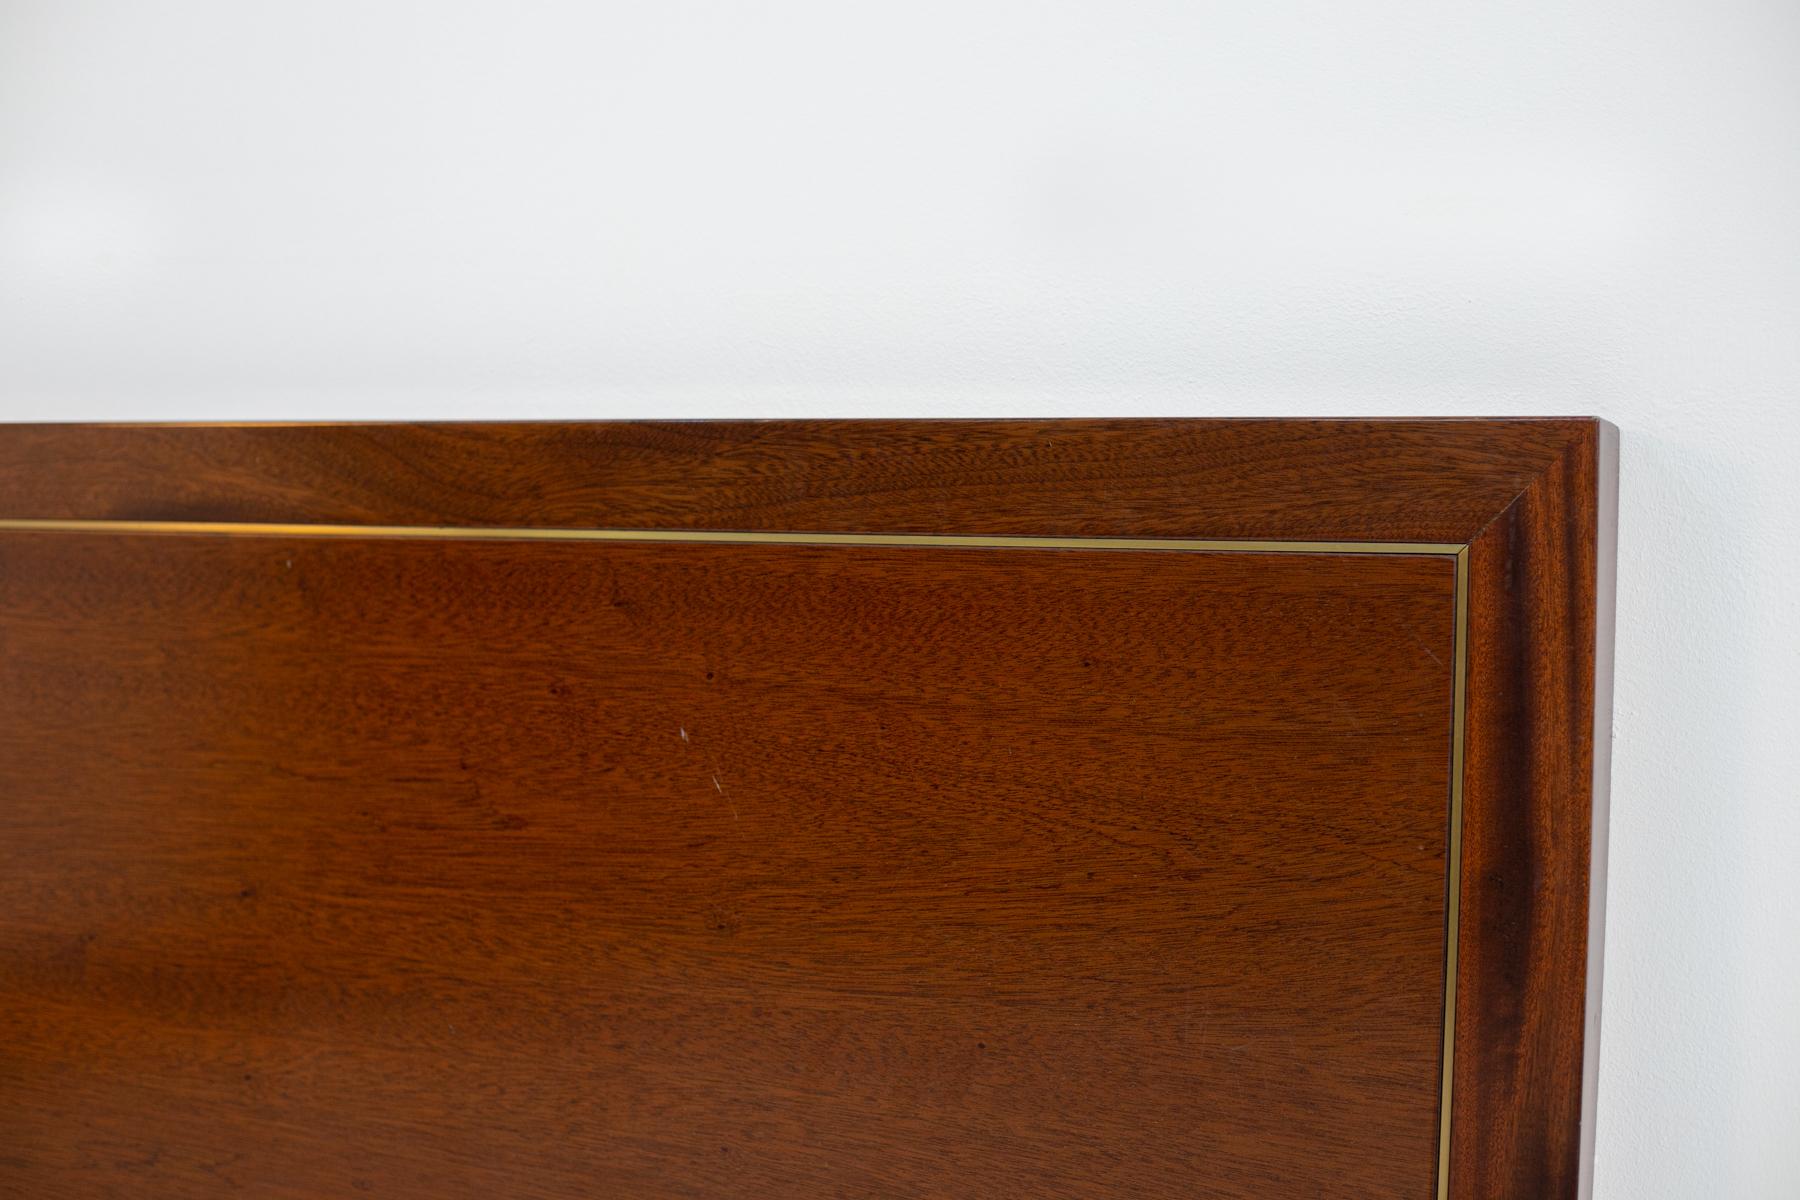 Pierre Balmain Headboard in Wood and Brass, Signed, 1980s For Sale 4